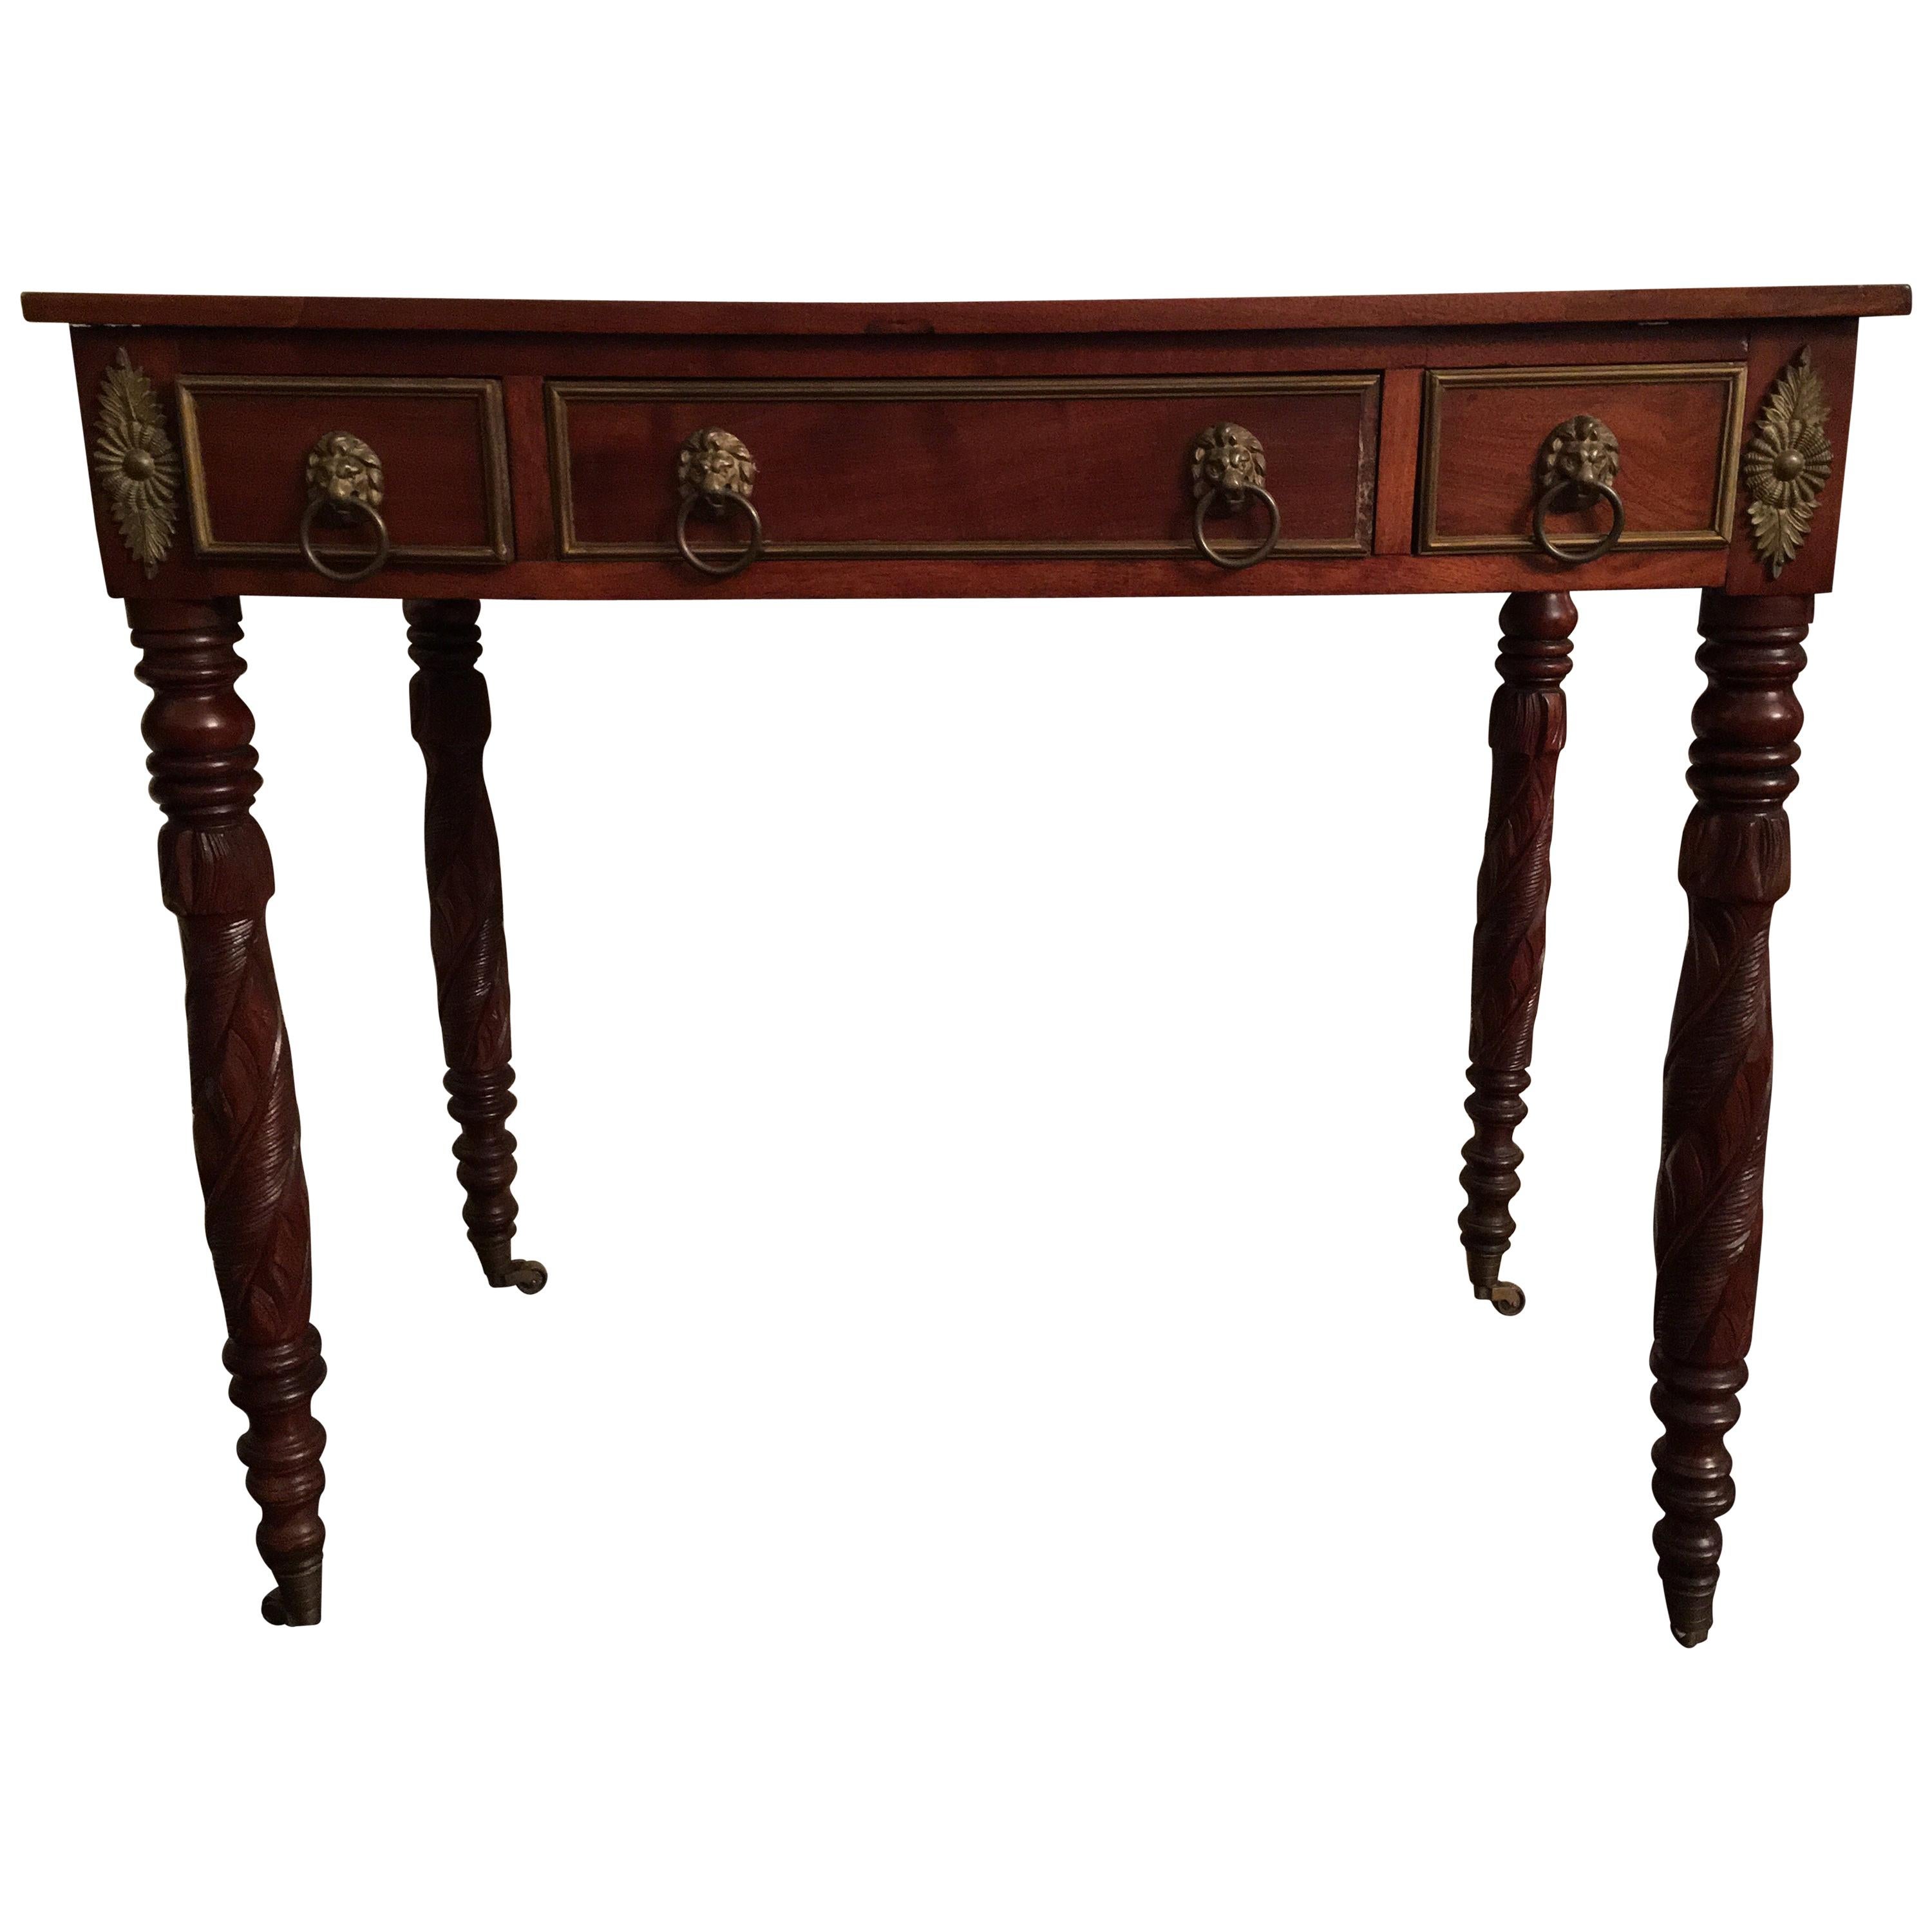 American Empire Writing Table with Carved Acanthus Legs, circa 1840 For Sale